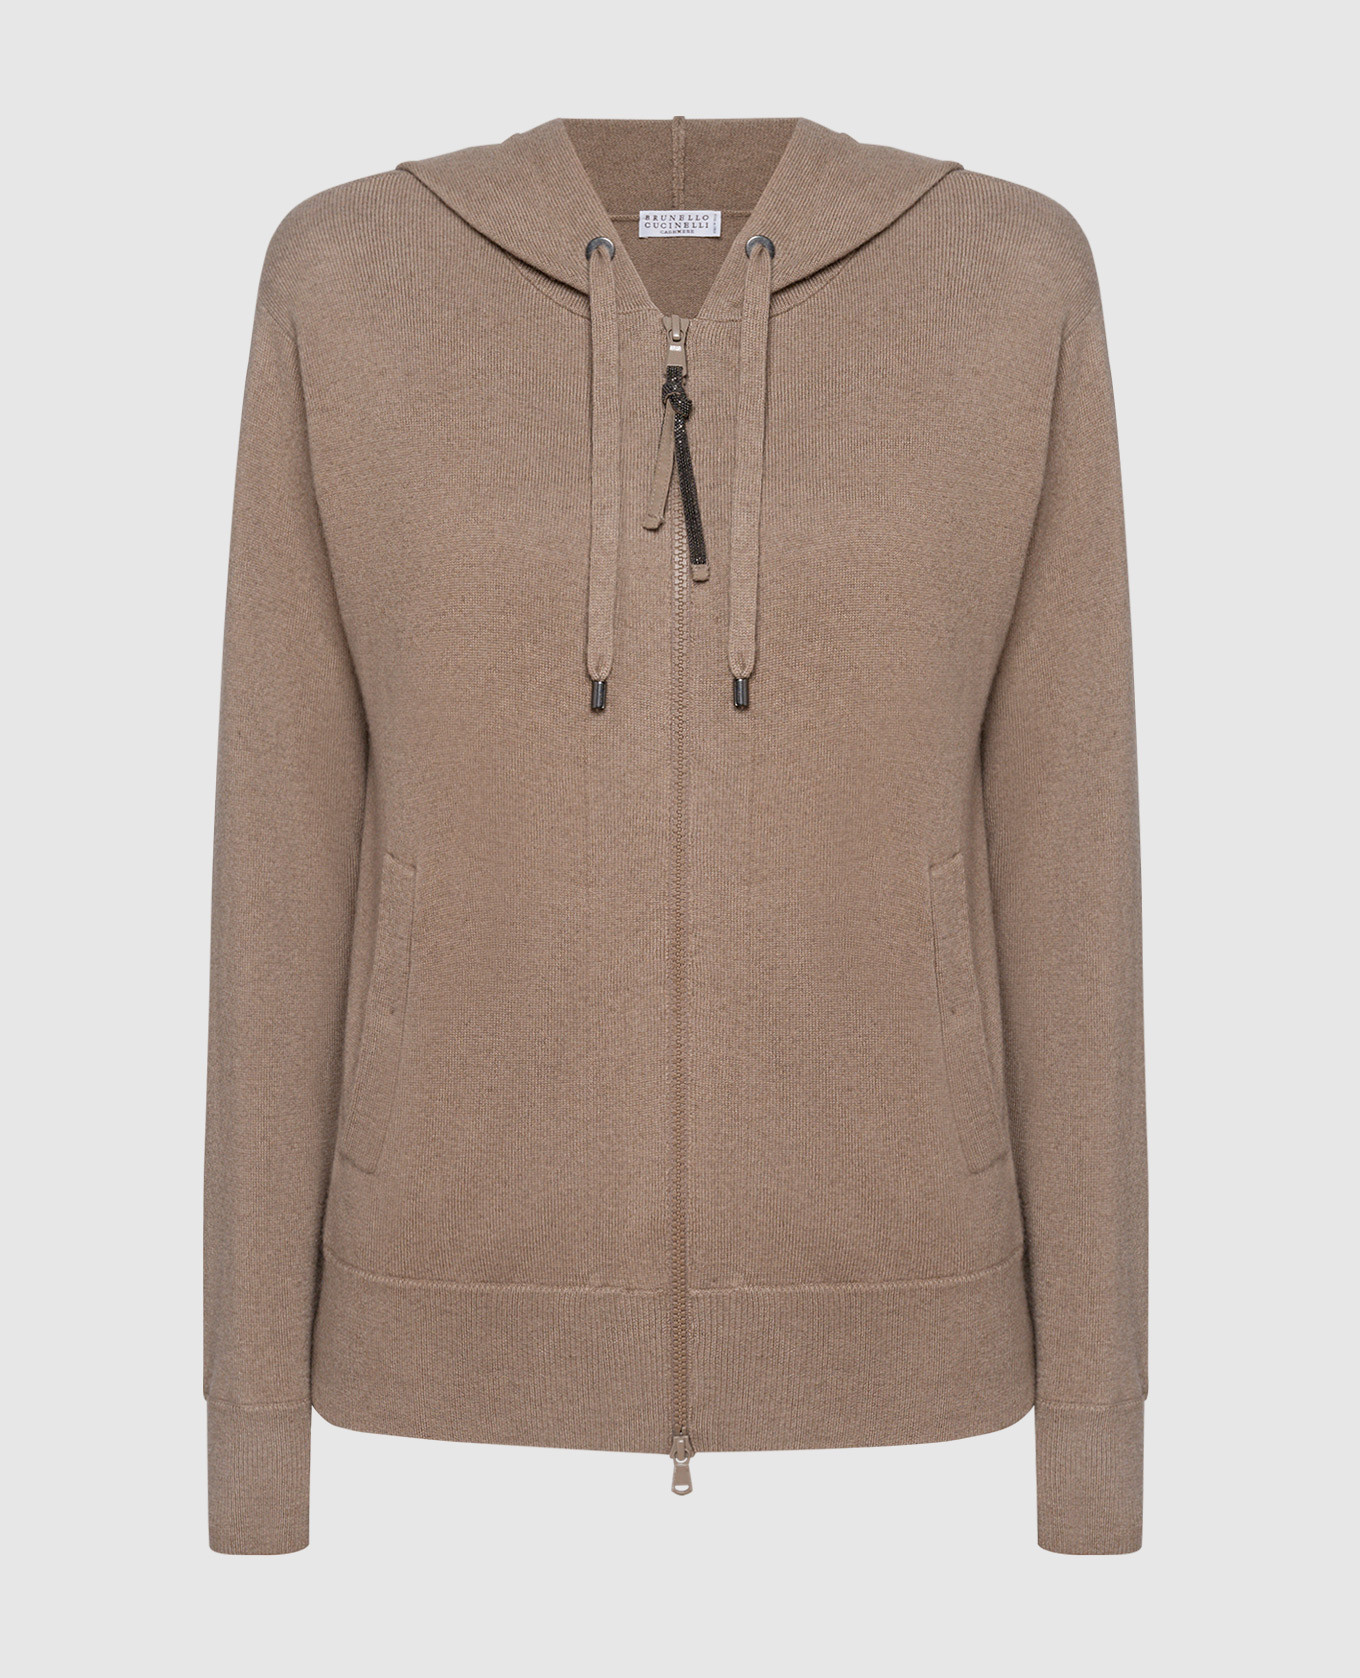 Brown cashmere sports jacket with monil chain